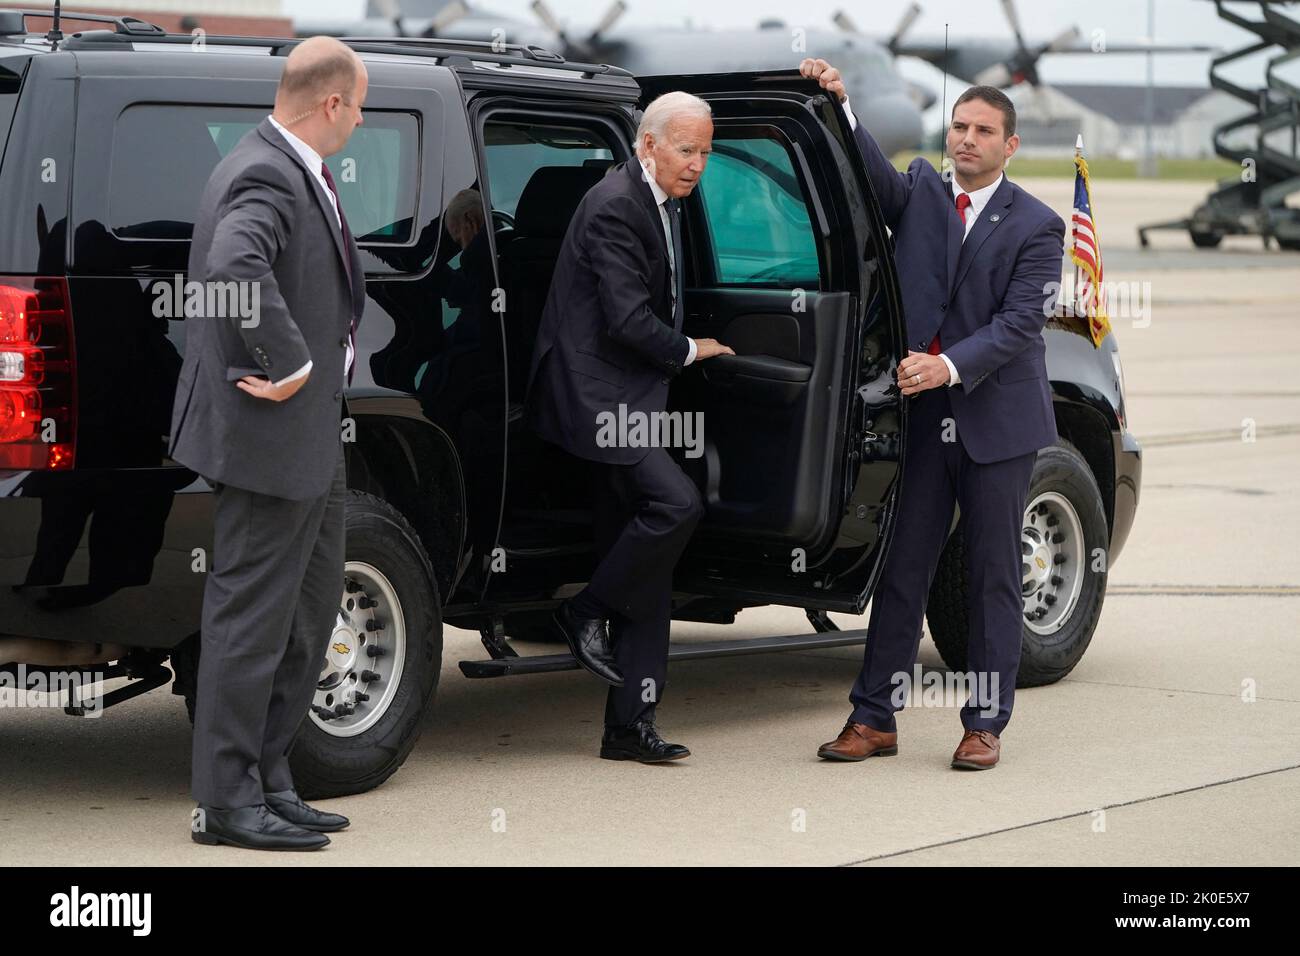 U.S. President Joe Biden steps from a vehicle before boarding Air Force One as he departs for Washington from New Castle, Delaware, U.S., September 11, 2022. REUTERS/Joshua Roberts Stock Photo